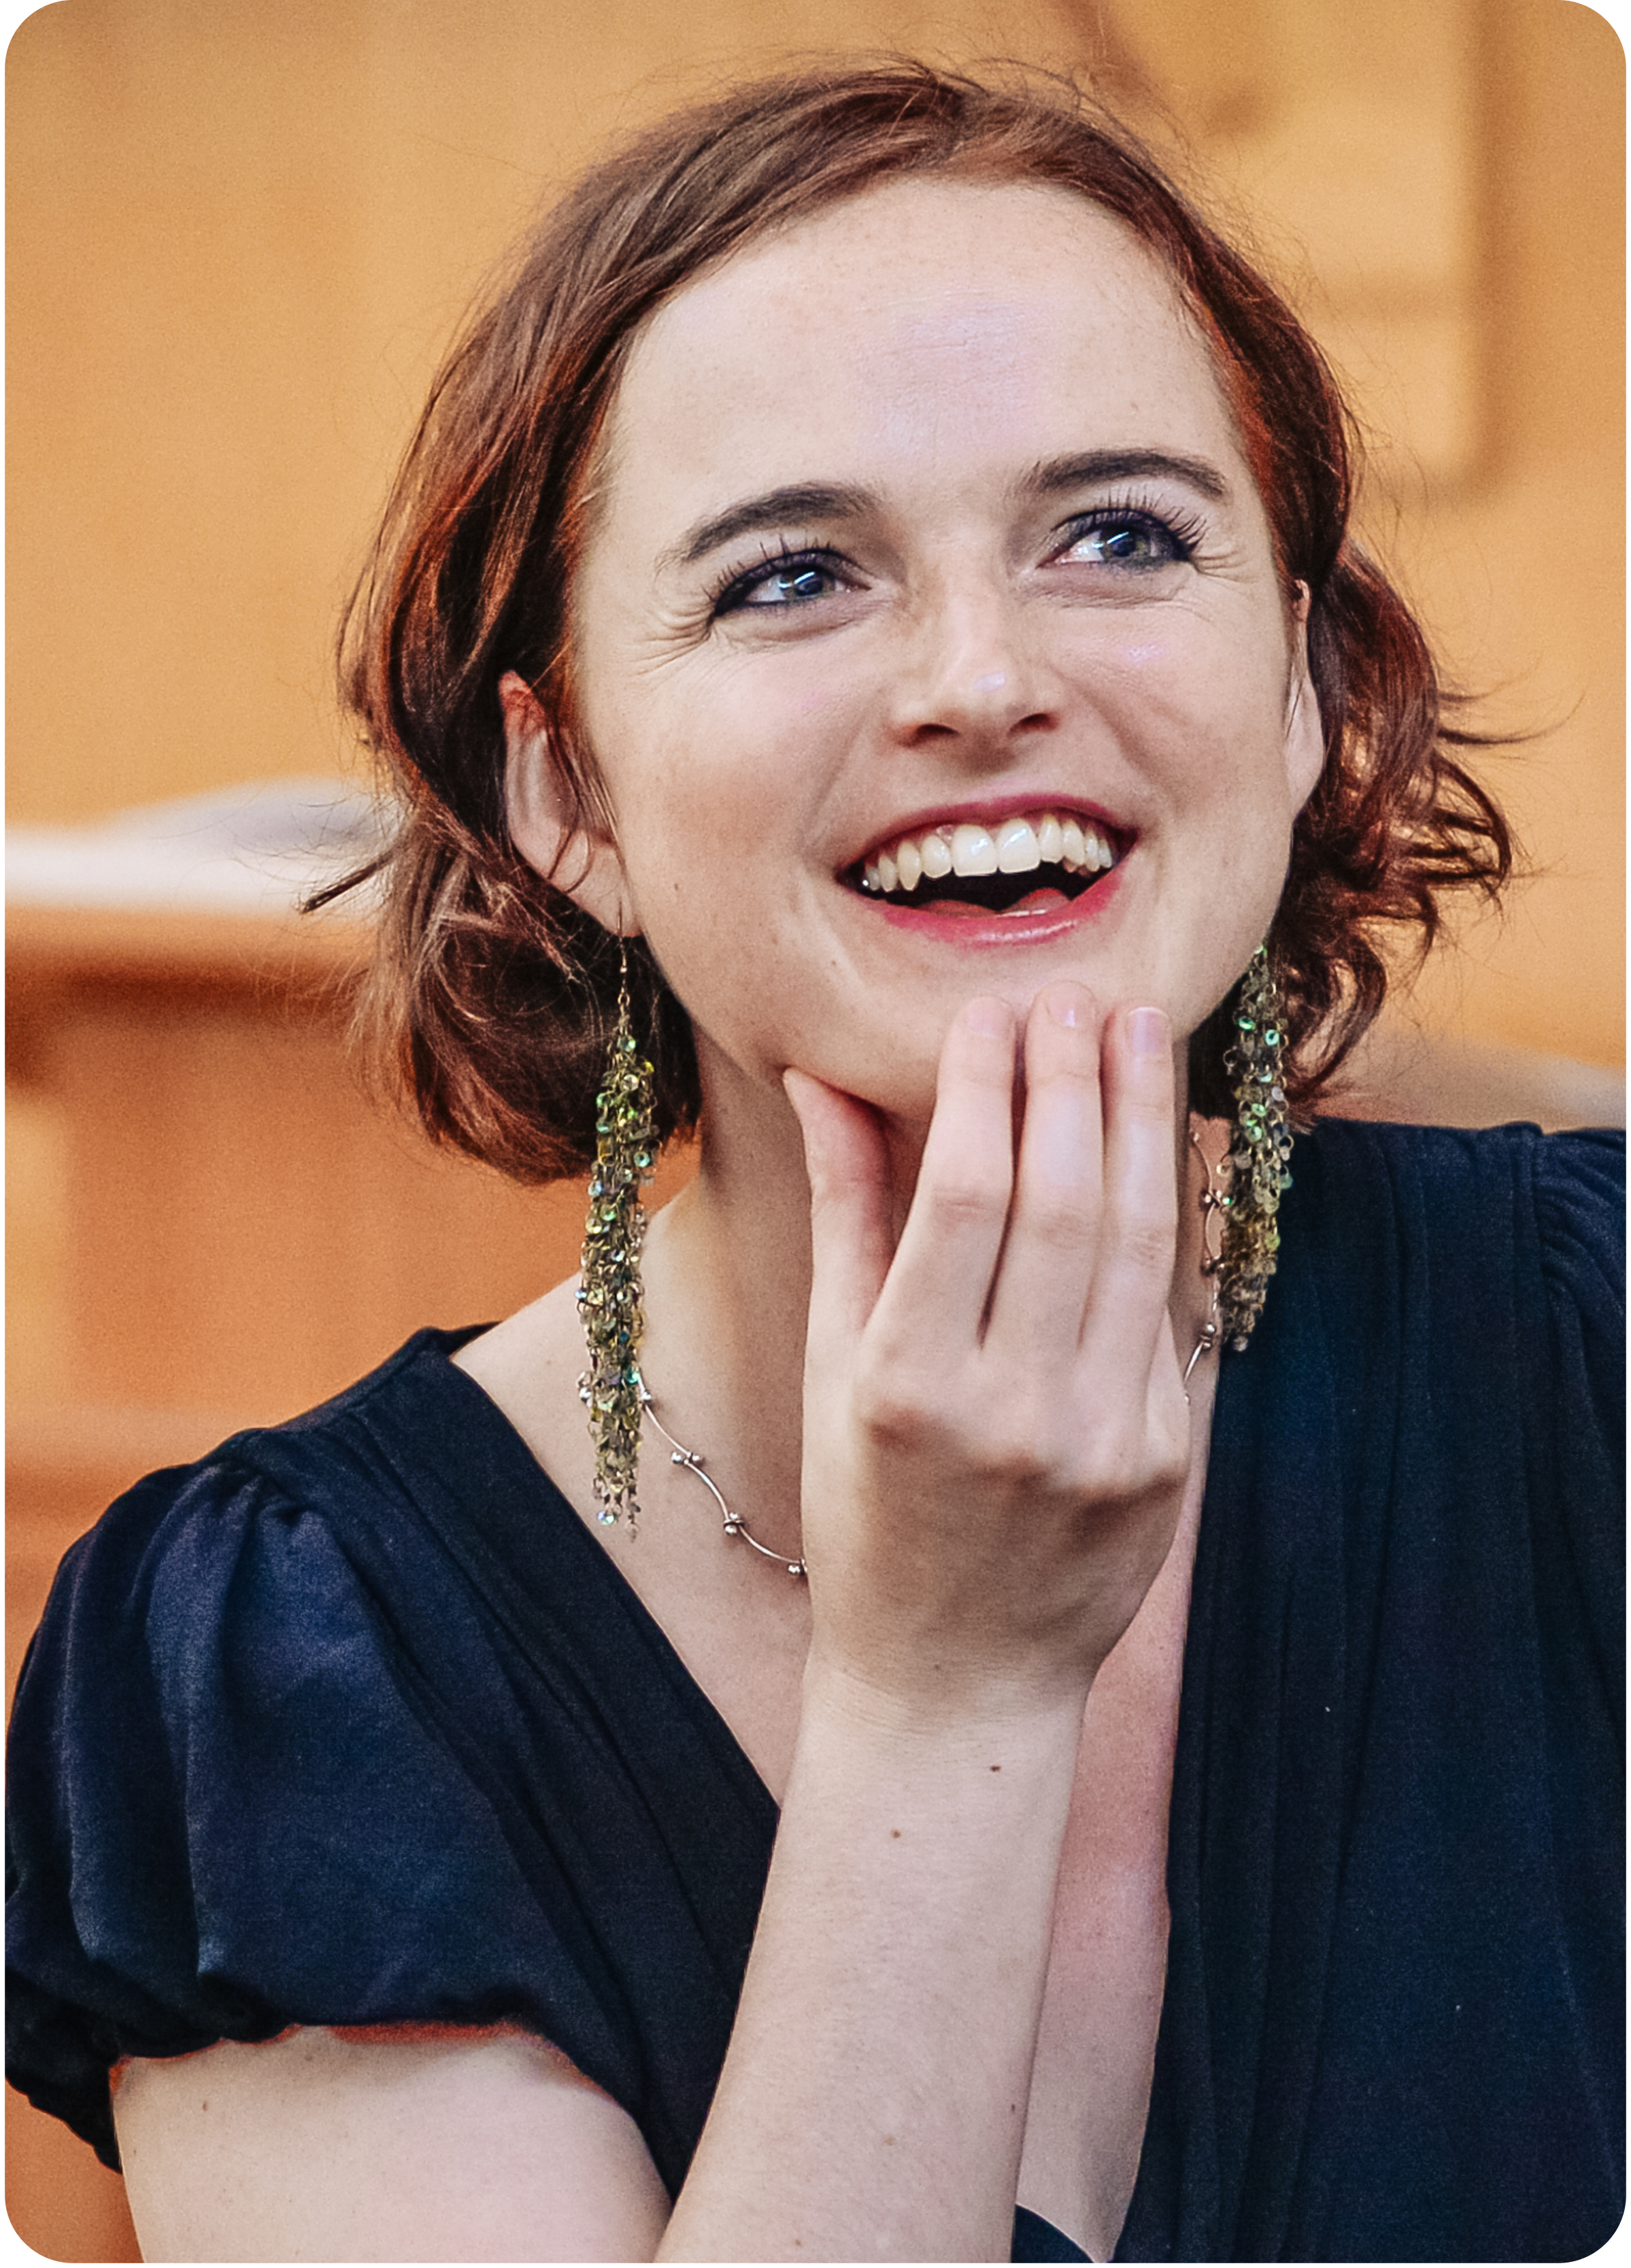 A smiling photo of Annabelle Lawson